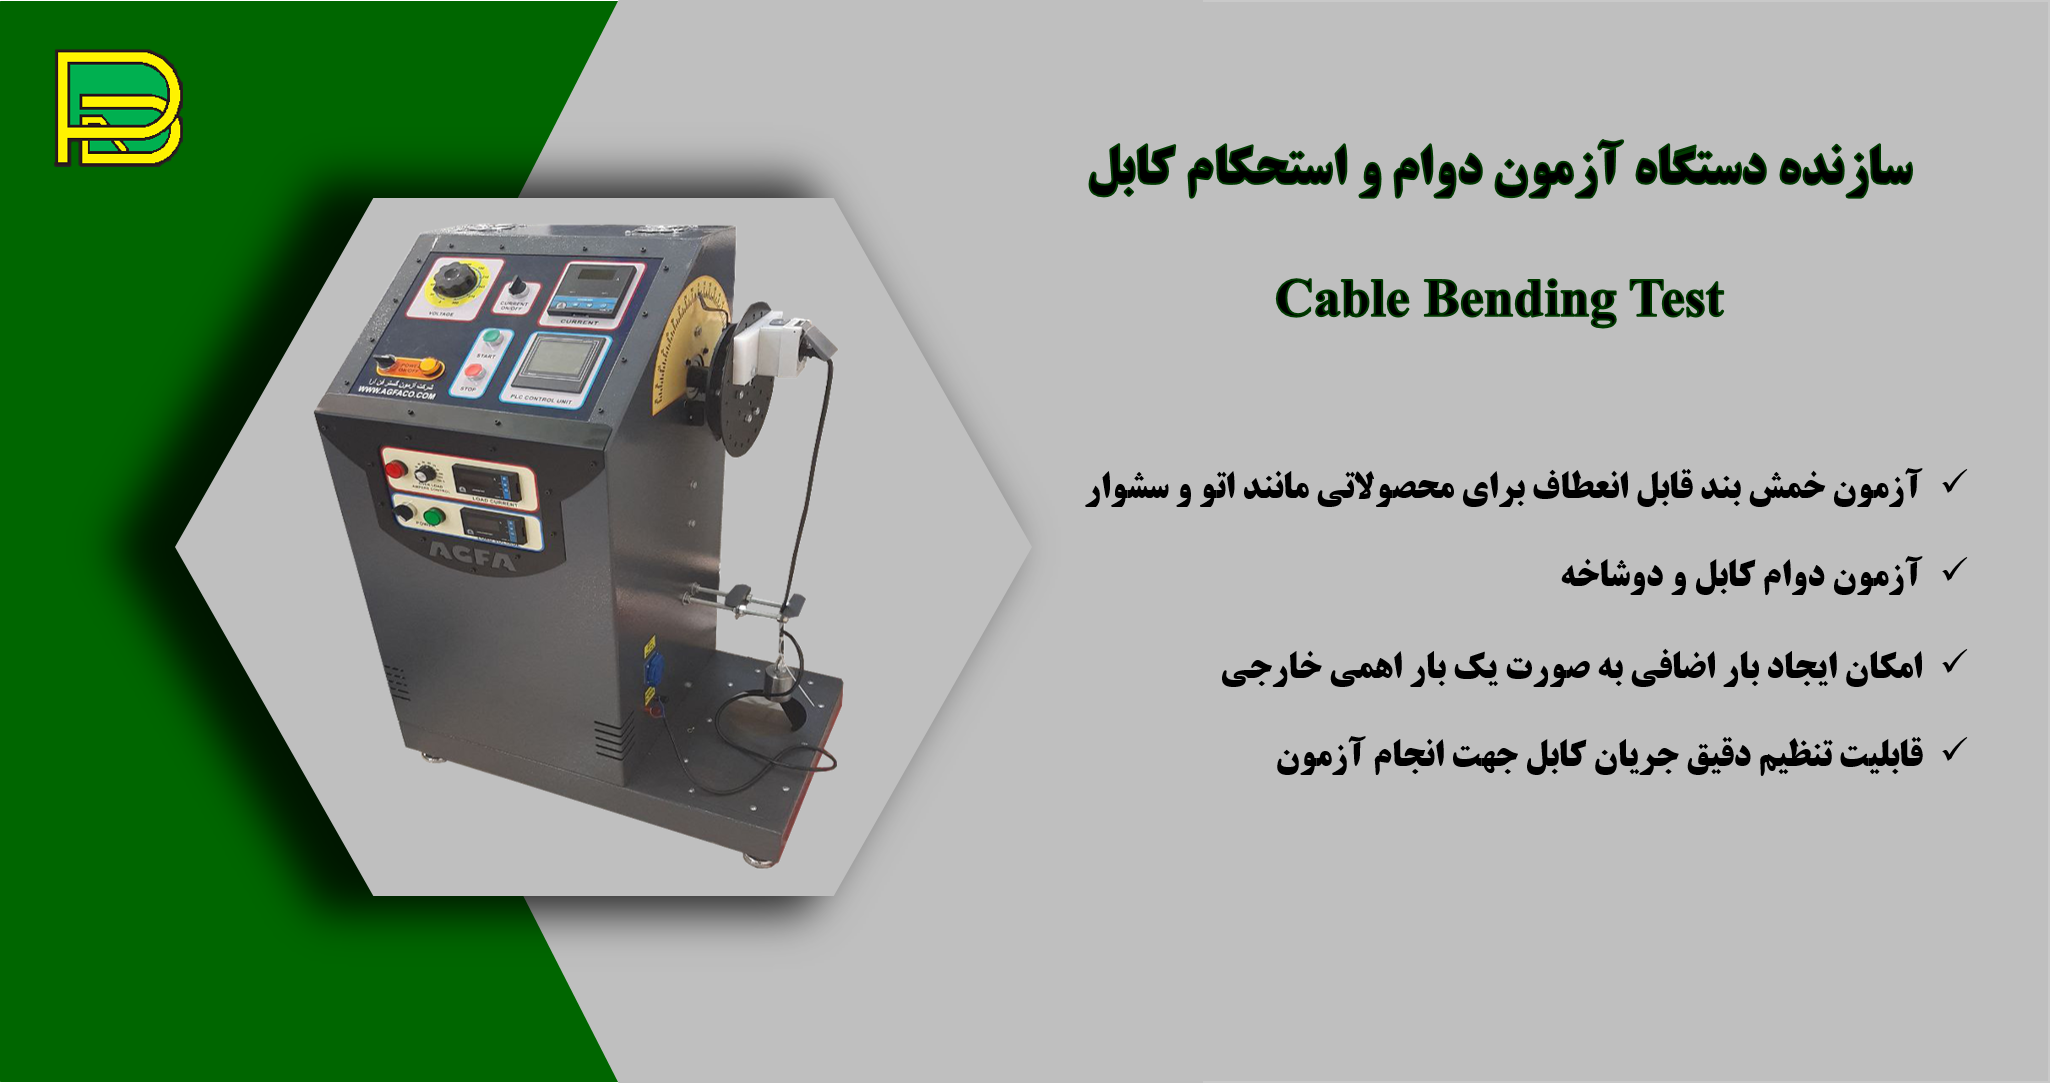 Cable Bending